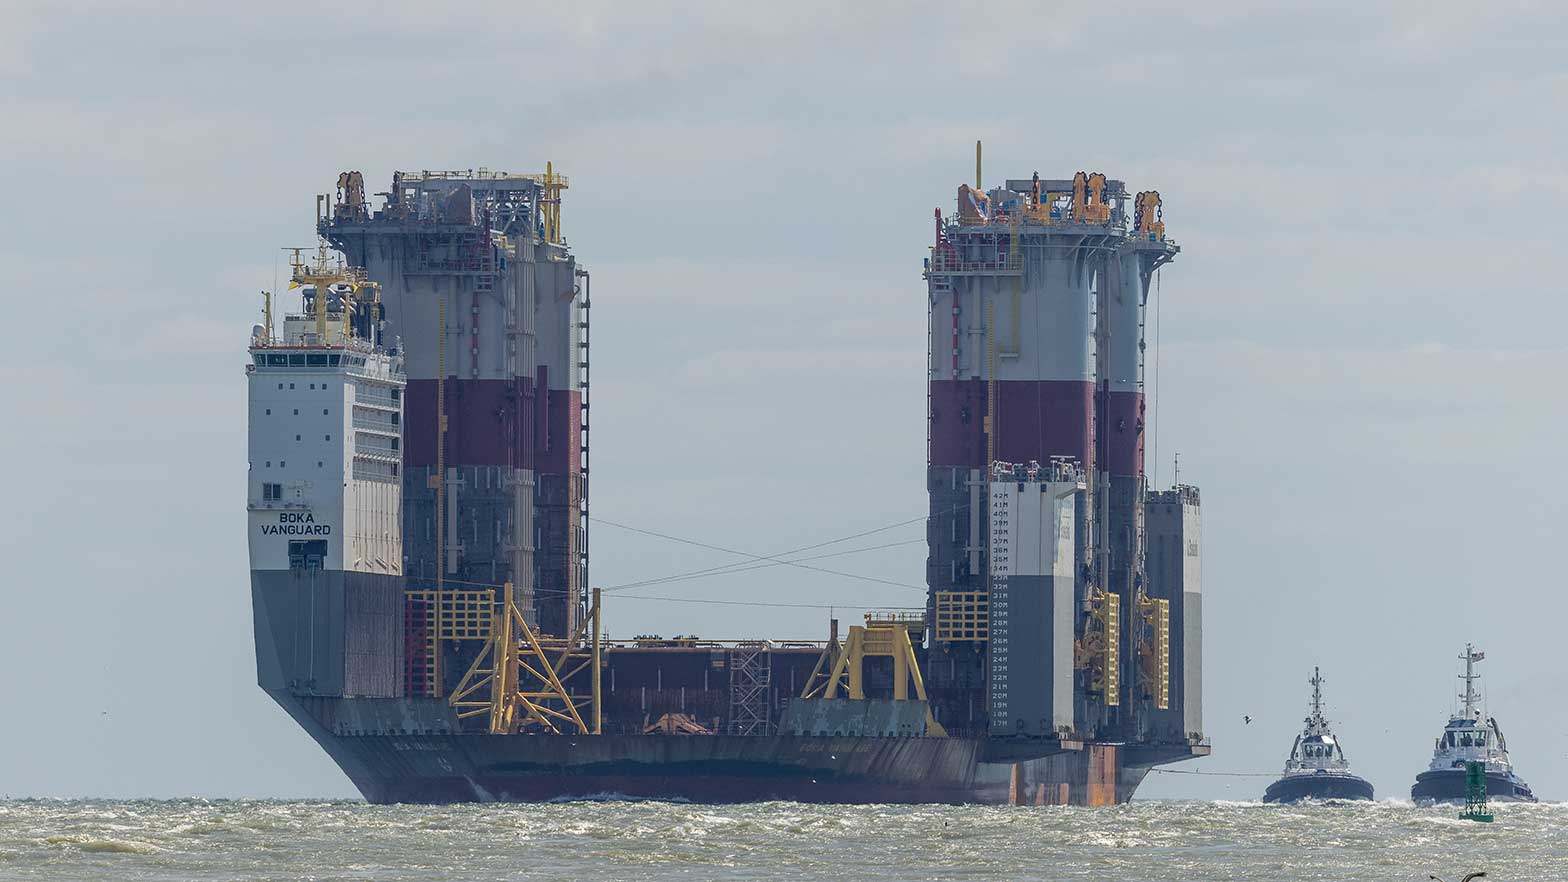 Anchor’s hull approaches the shoreline of Ingleside, Texas, after completing its more than two-month journey aboard Boskalis's Vanguard heavy transport vessel from South Korea.